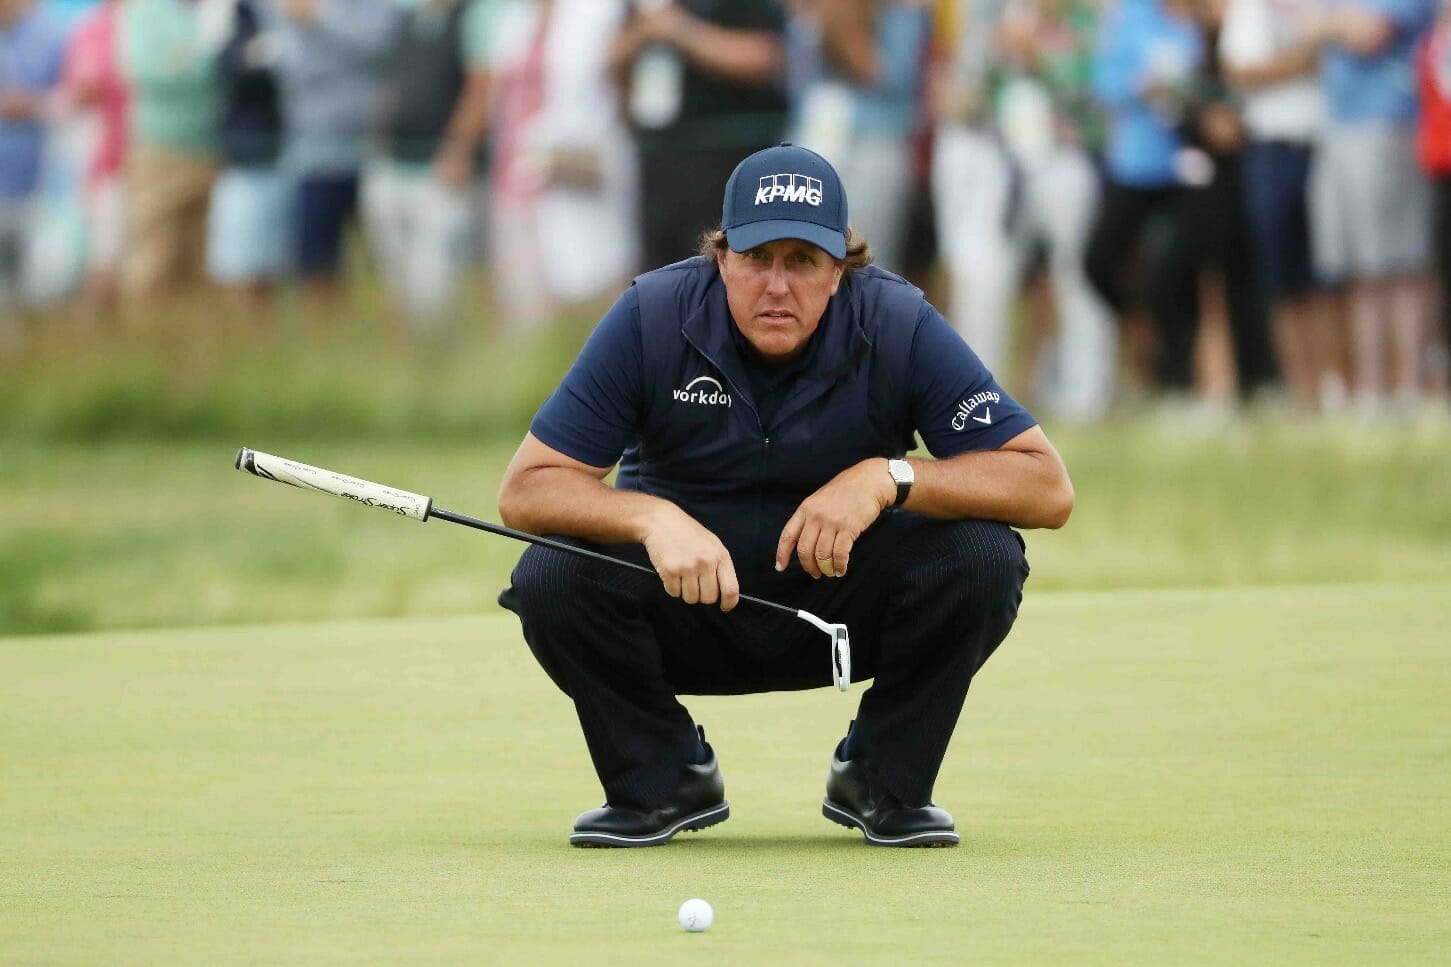 Phil Mickelson, What have you done?